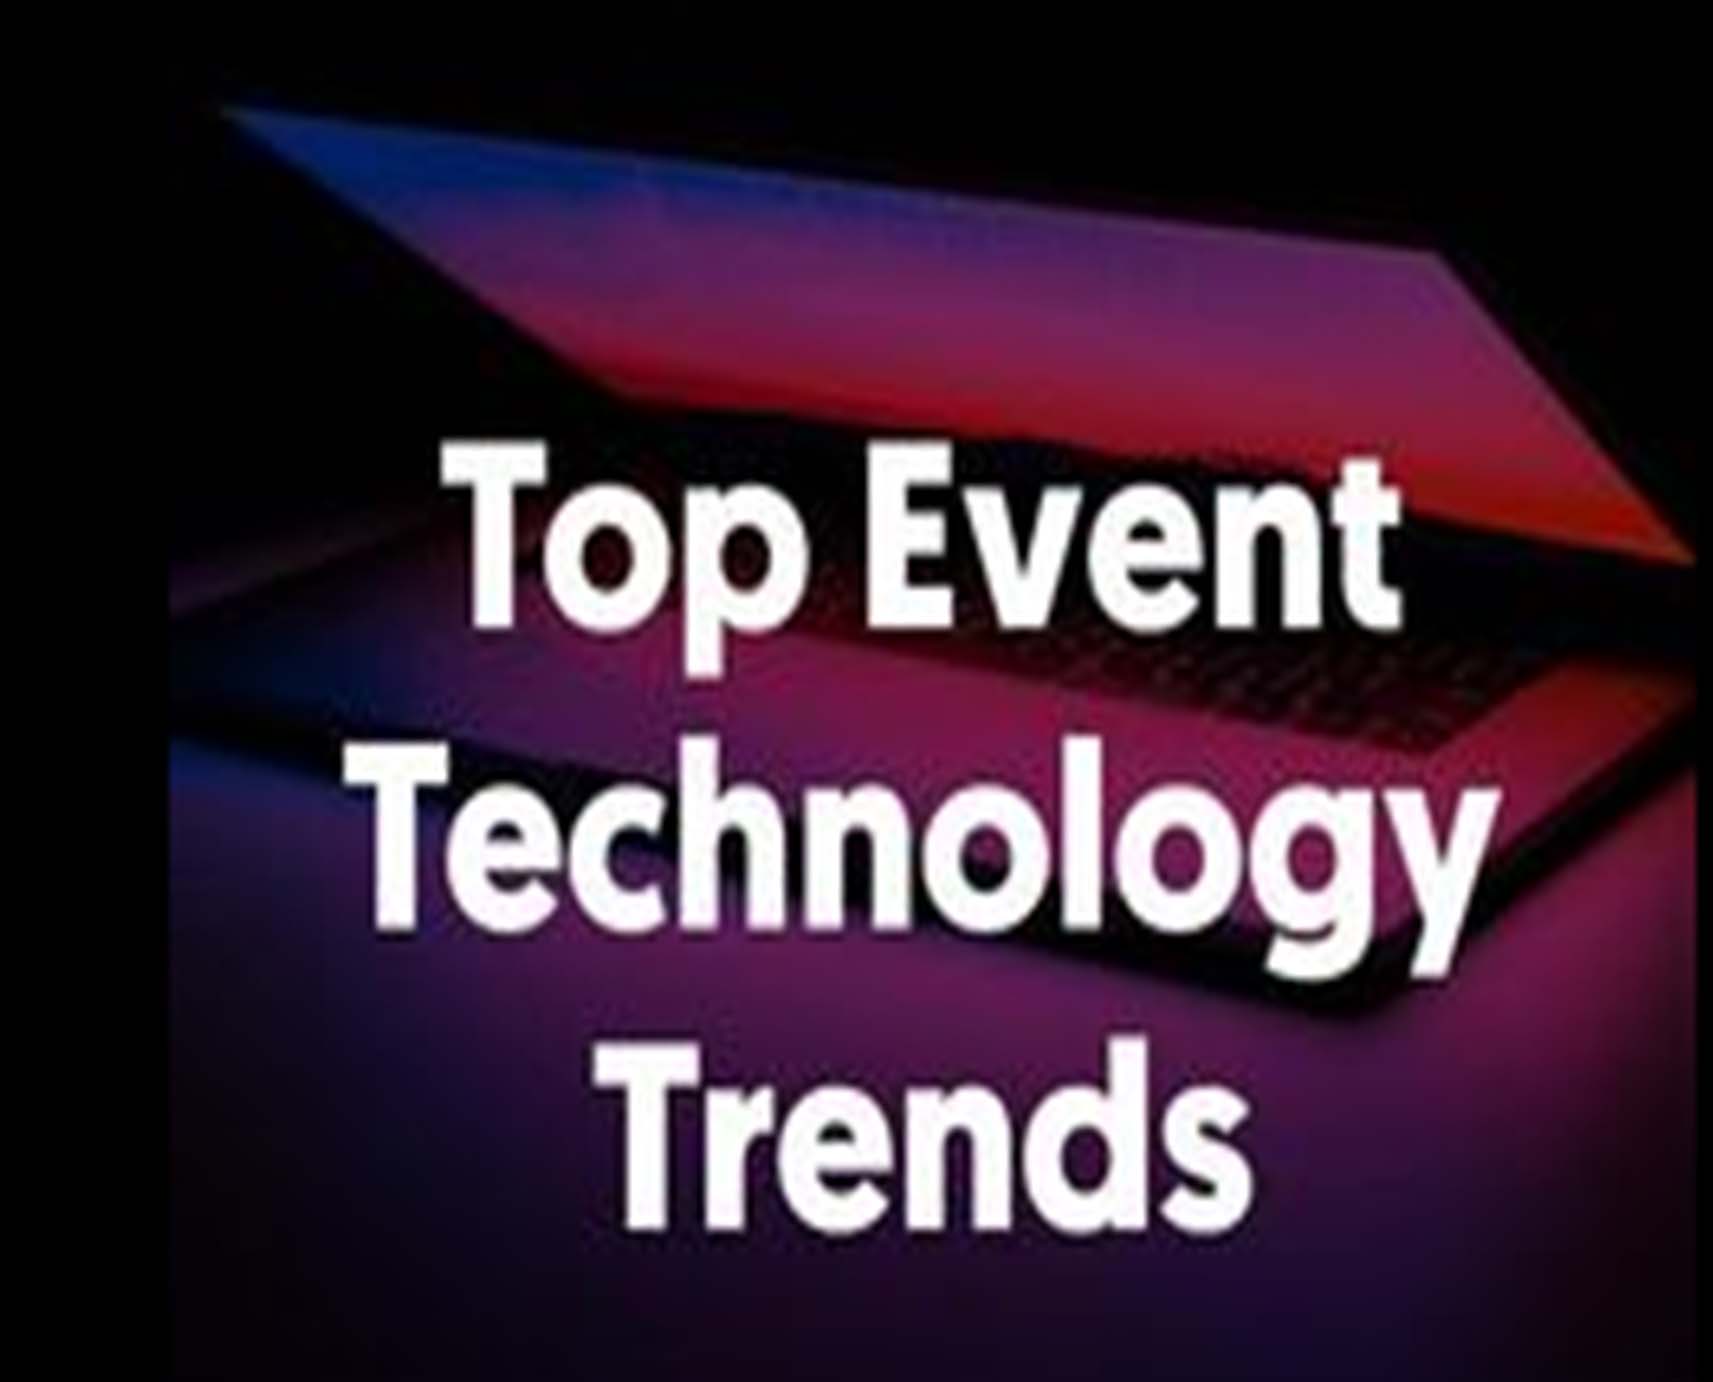 Top Event Technology Trend